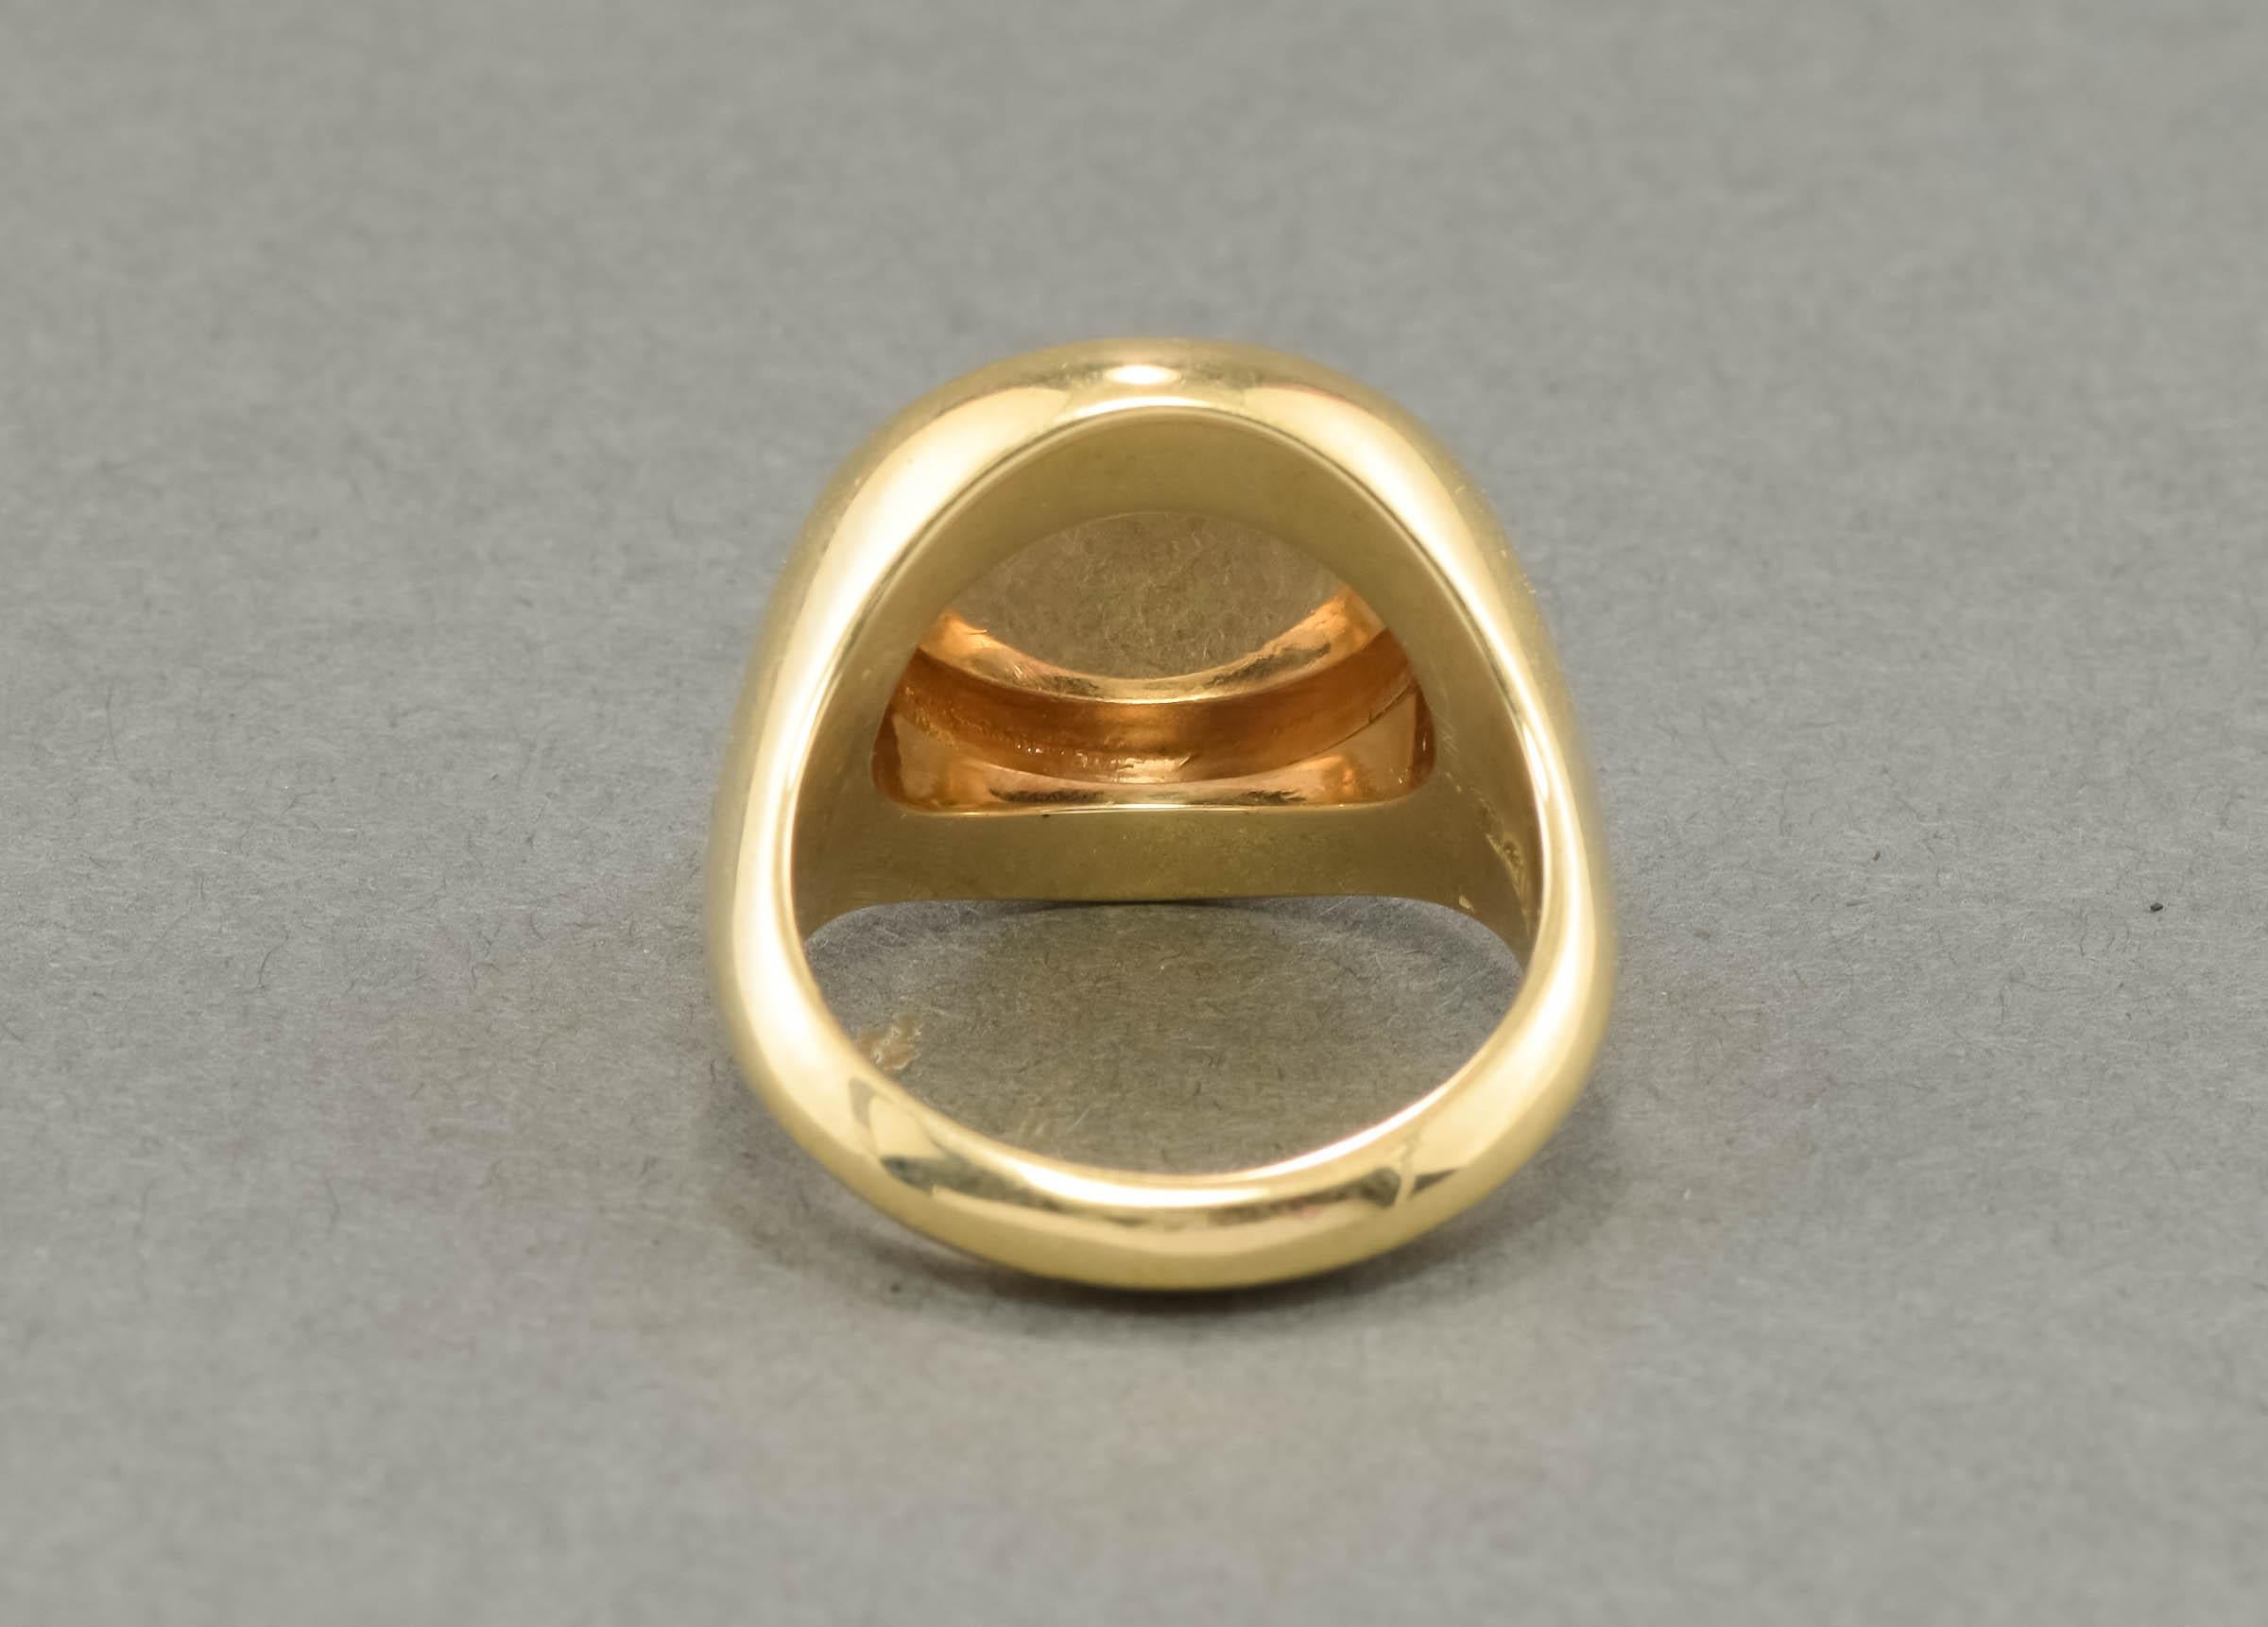 Dog Signet Ring in 14k Gold, Substantial Art Nouveau Design In Excellent Condition For Sale In Danvers, MA